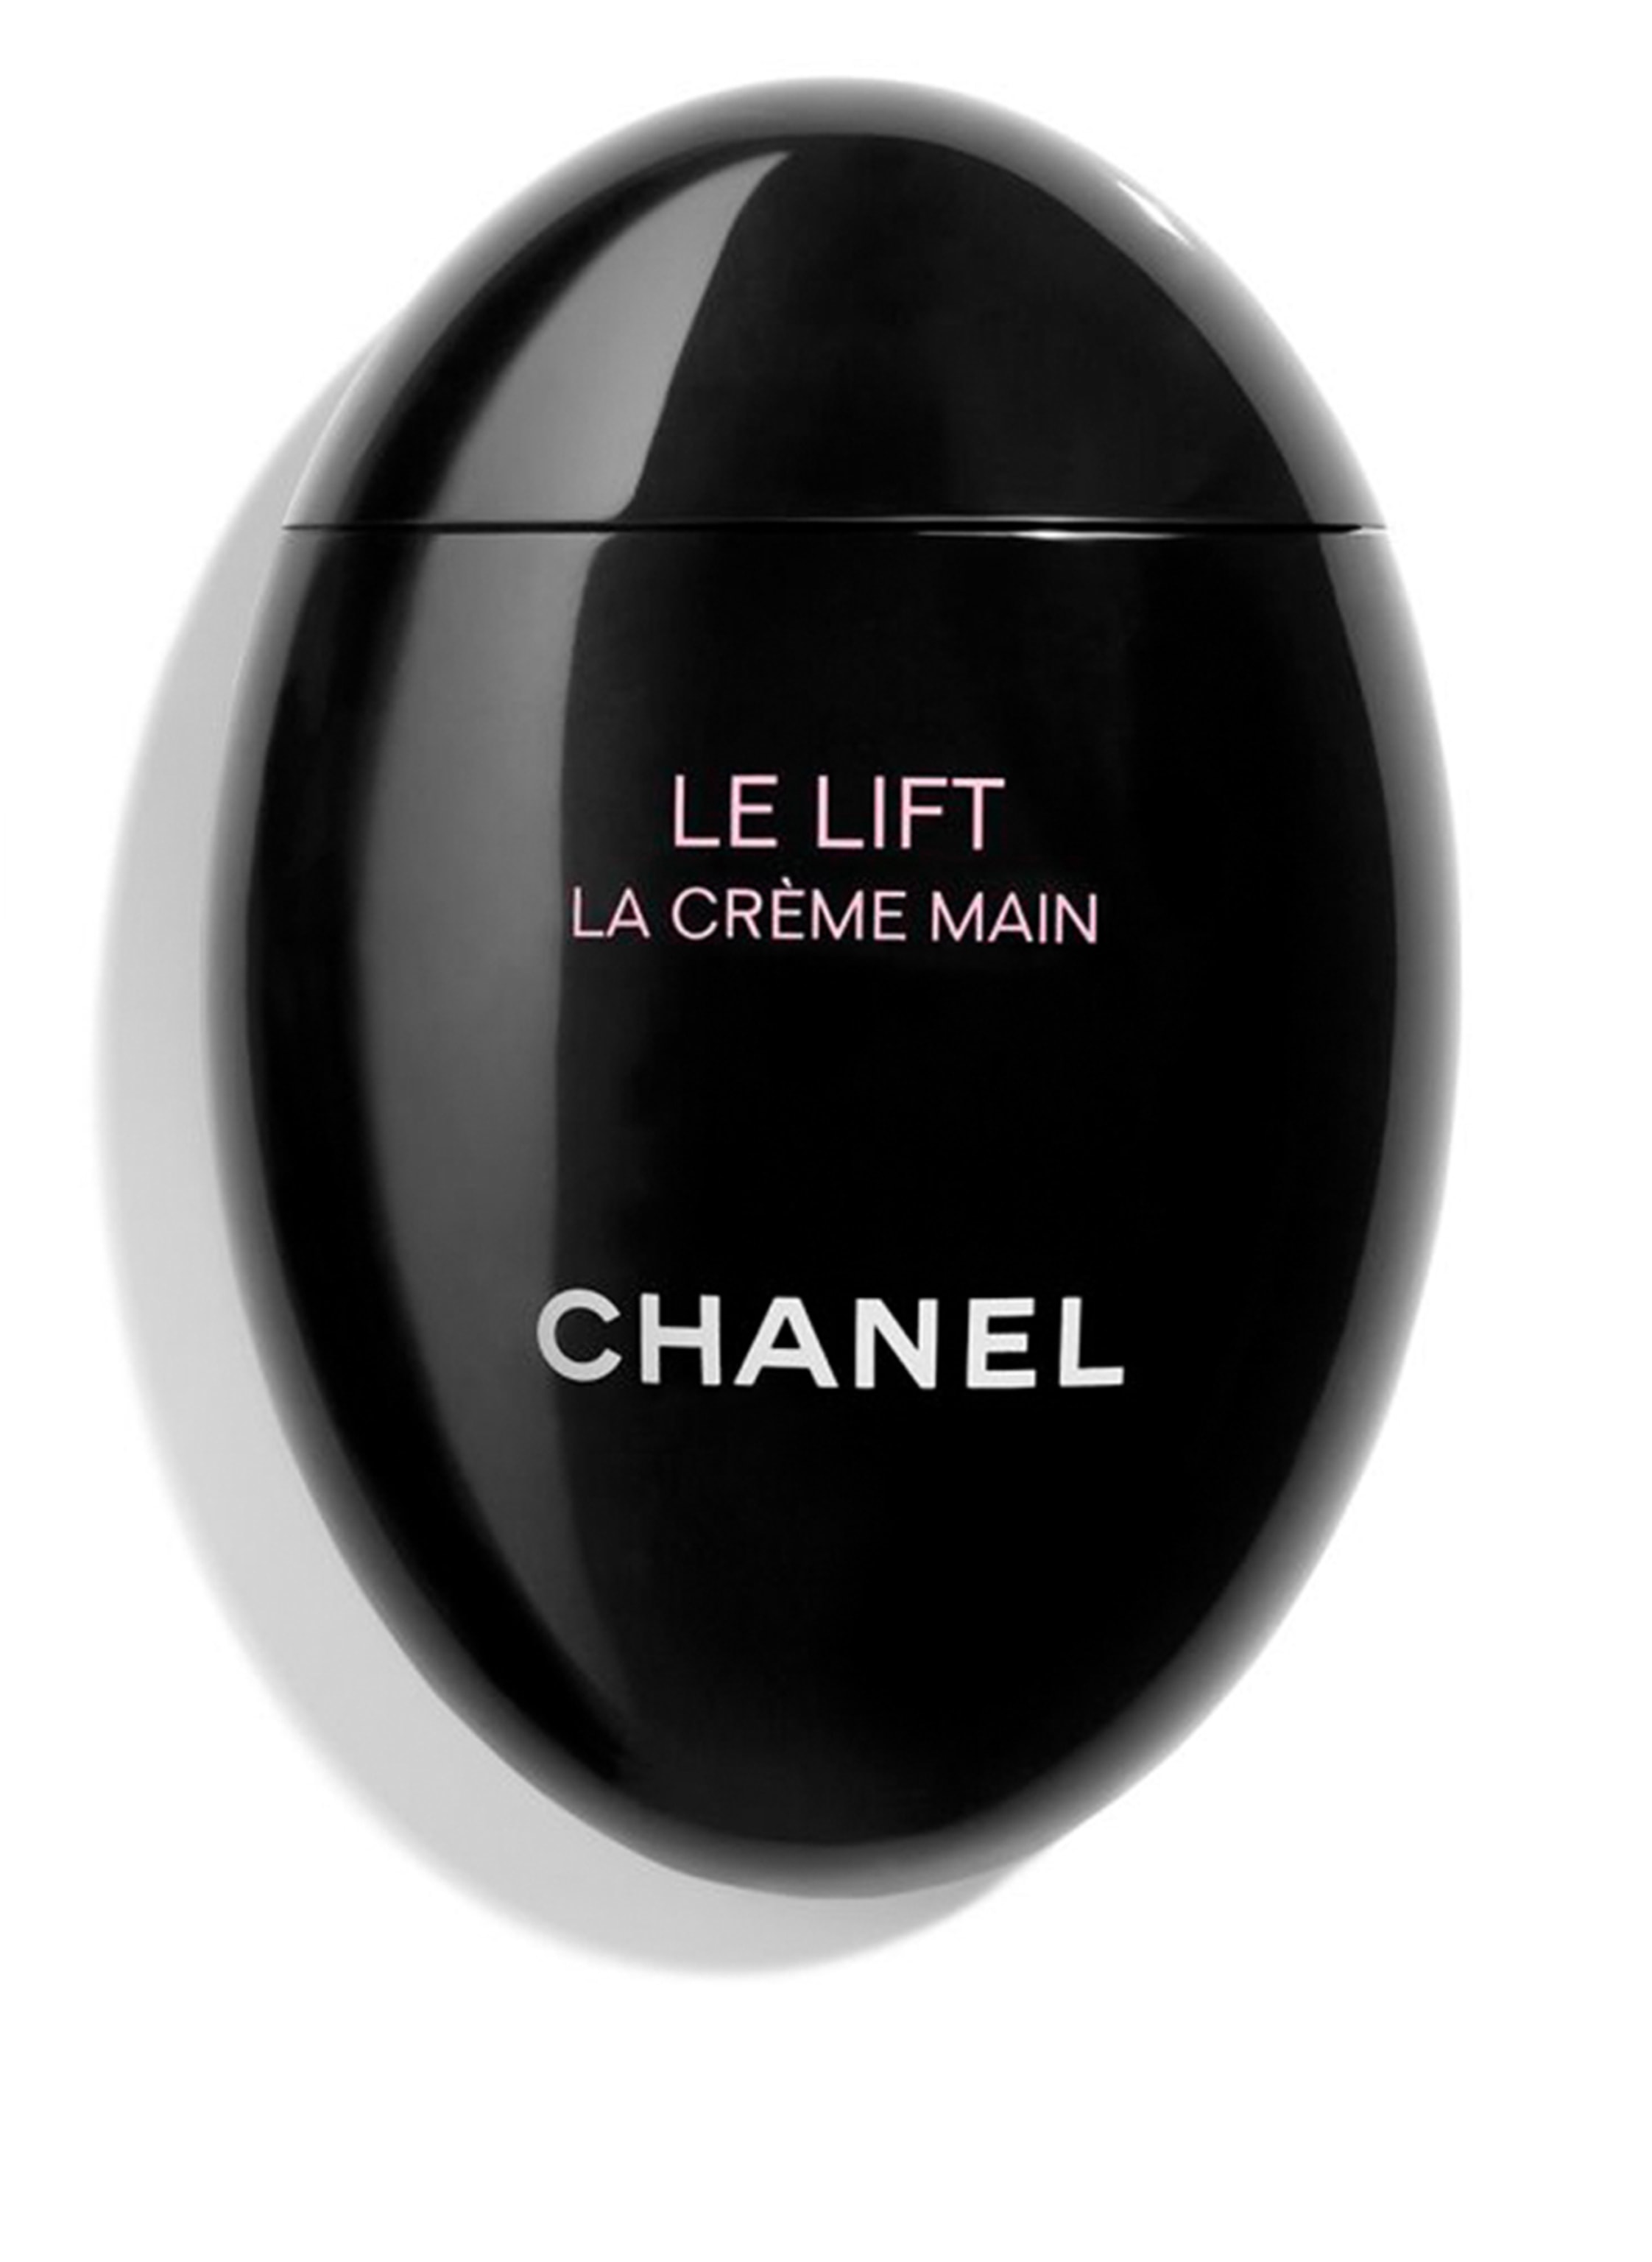 chanel 5 scent